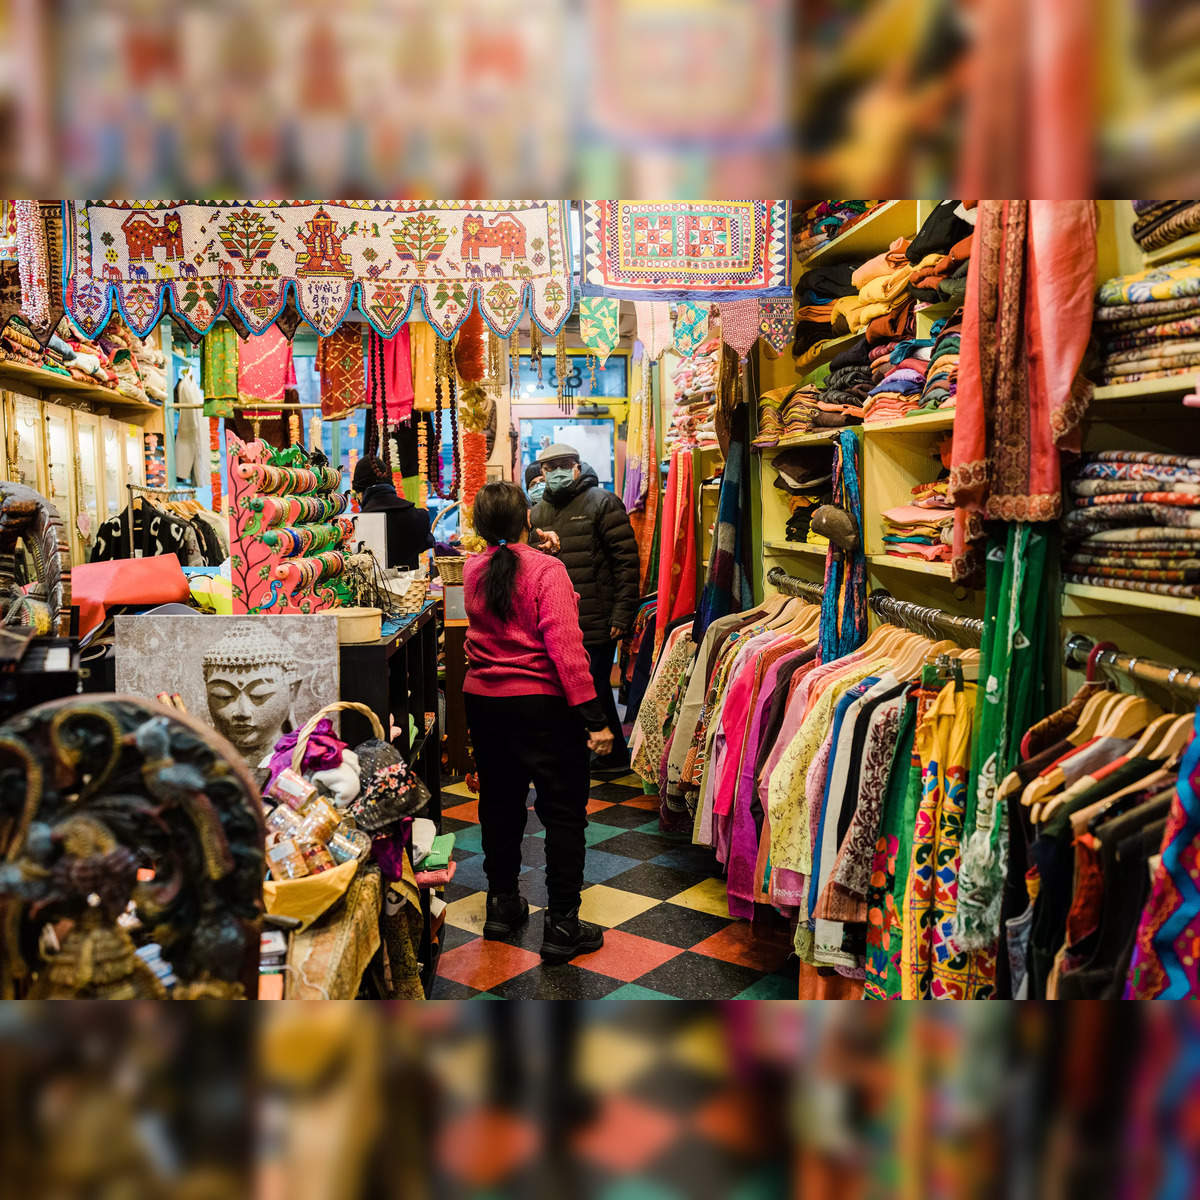 Indian Boutique: After nearly 50 years, a beloved East Village